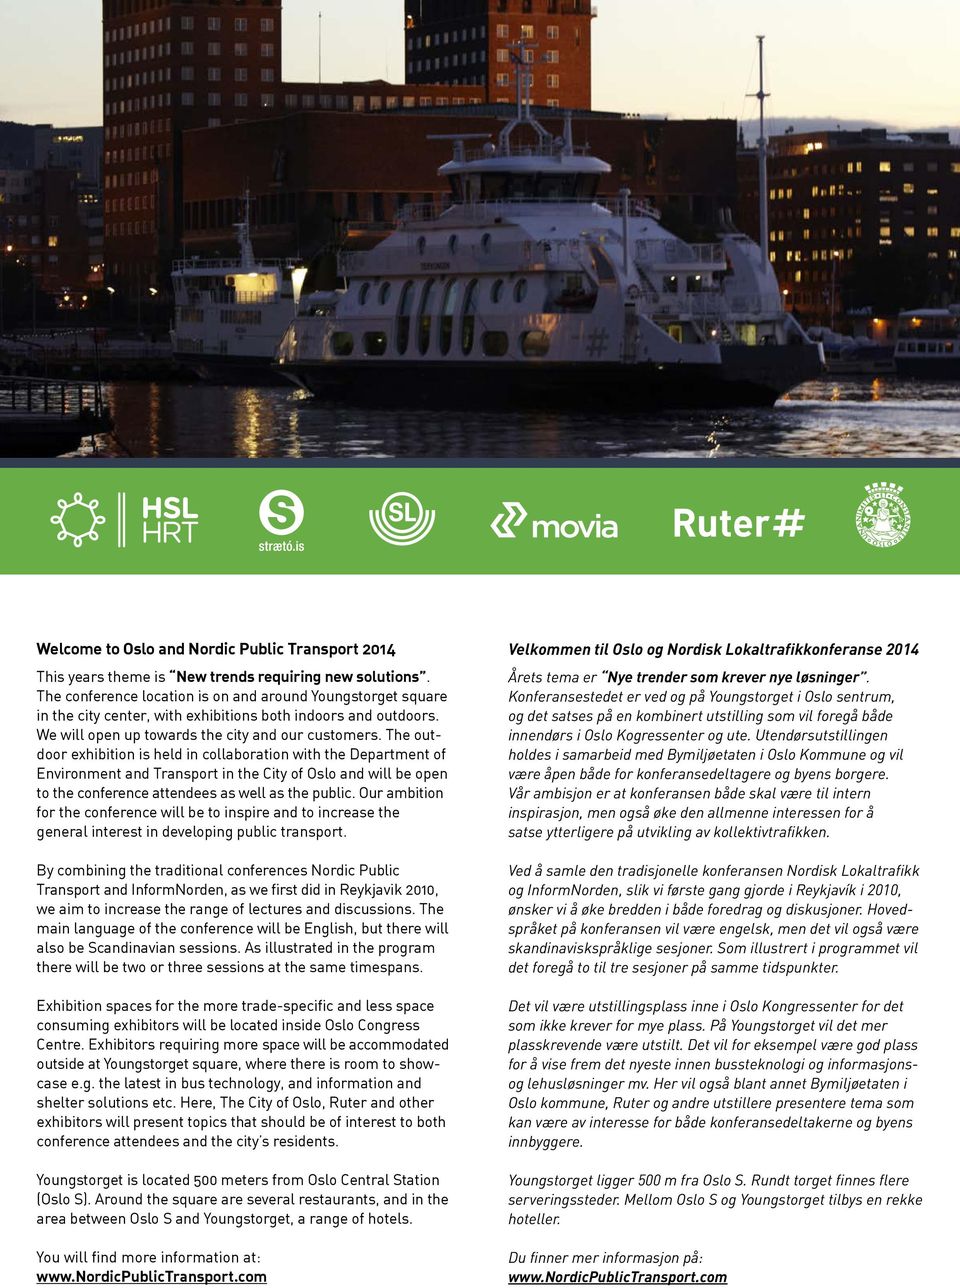 The outdoor exhibition is held in collaboration with the Department of Environment and Transport in the City of Oslo and will be open to the conference attendees as well as the public.